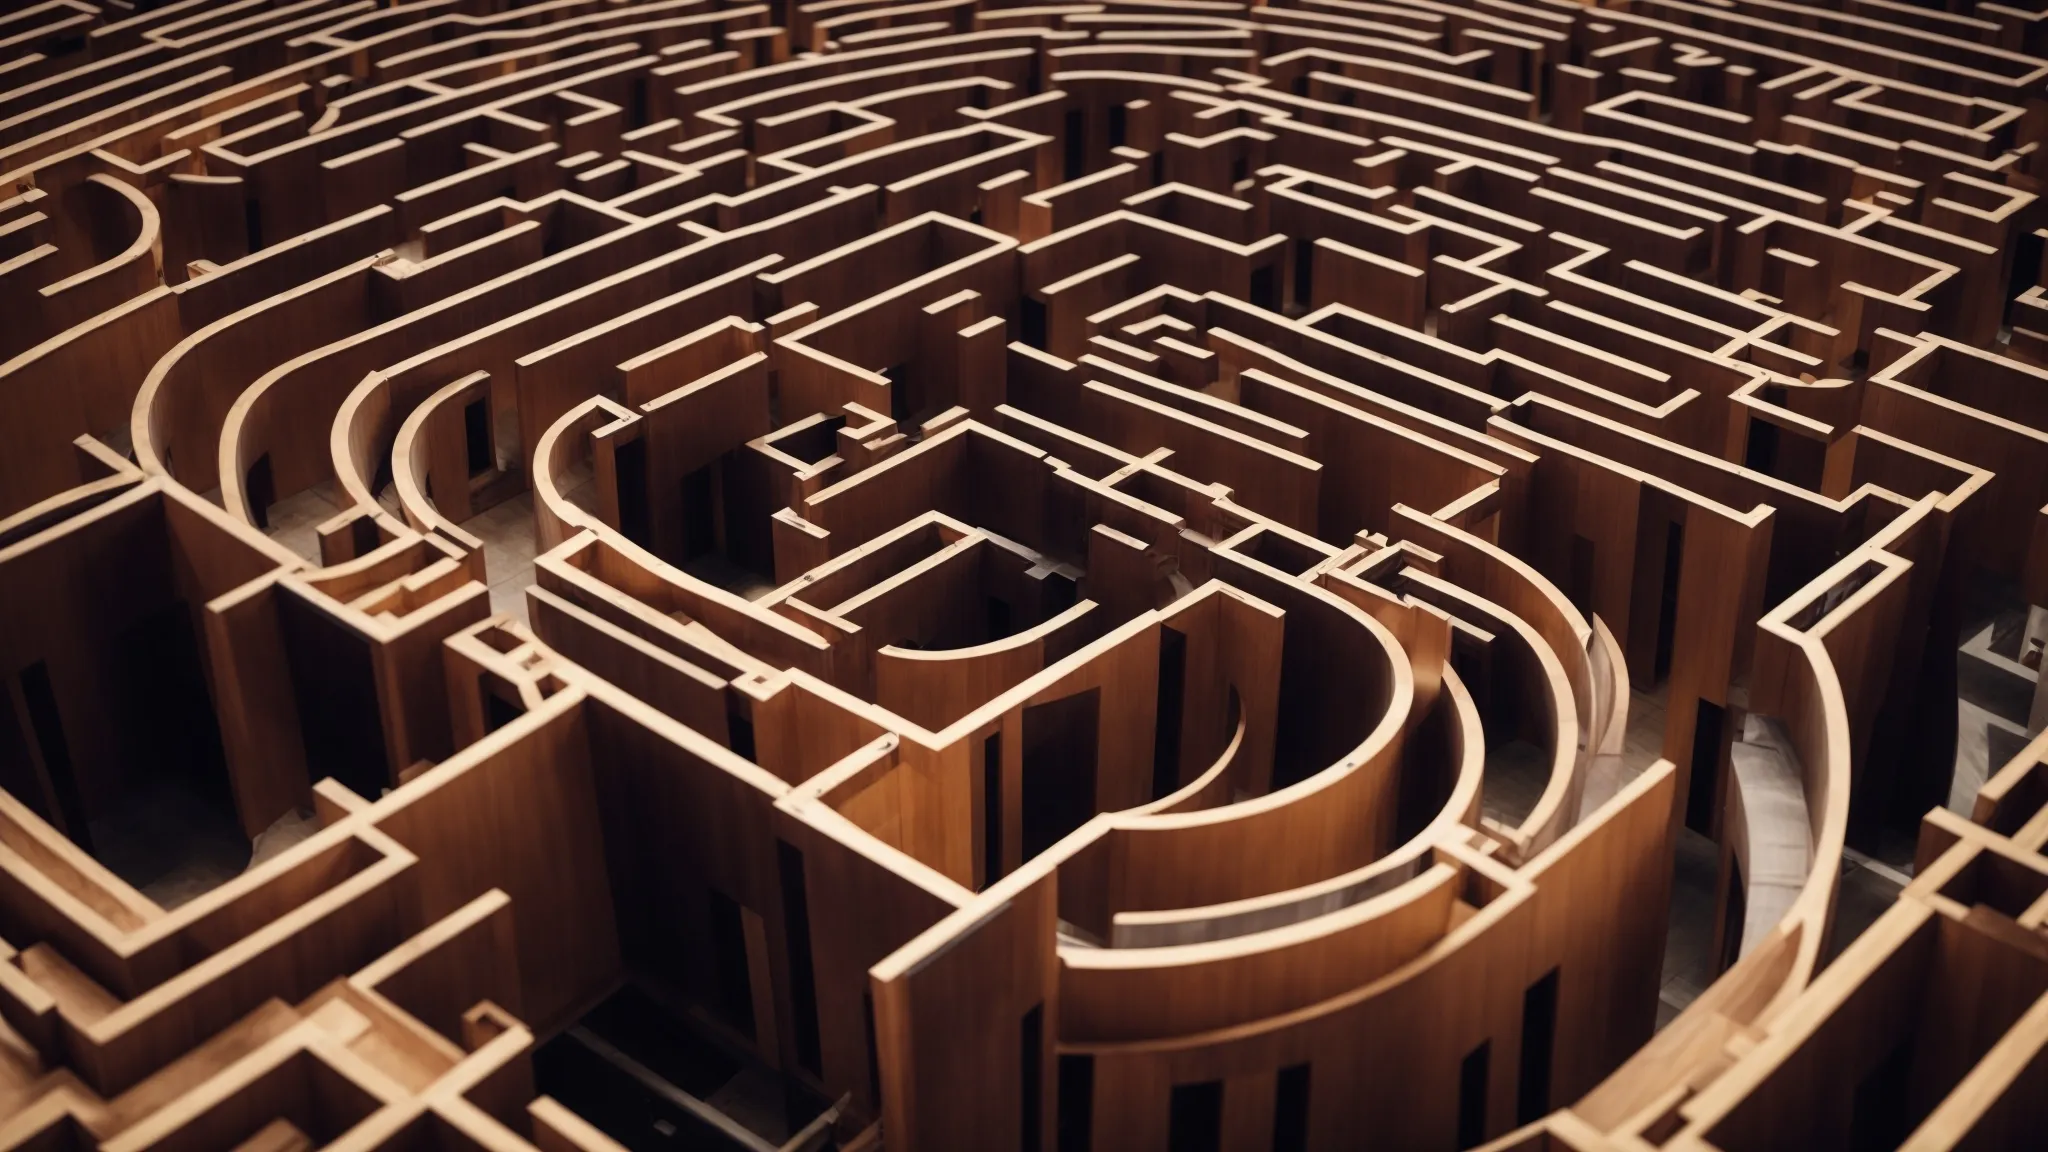 a bird's eye view of a complex maze symbolizing the intricacies of off-page seo strategies.